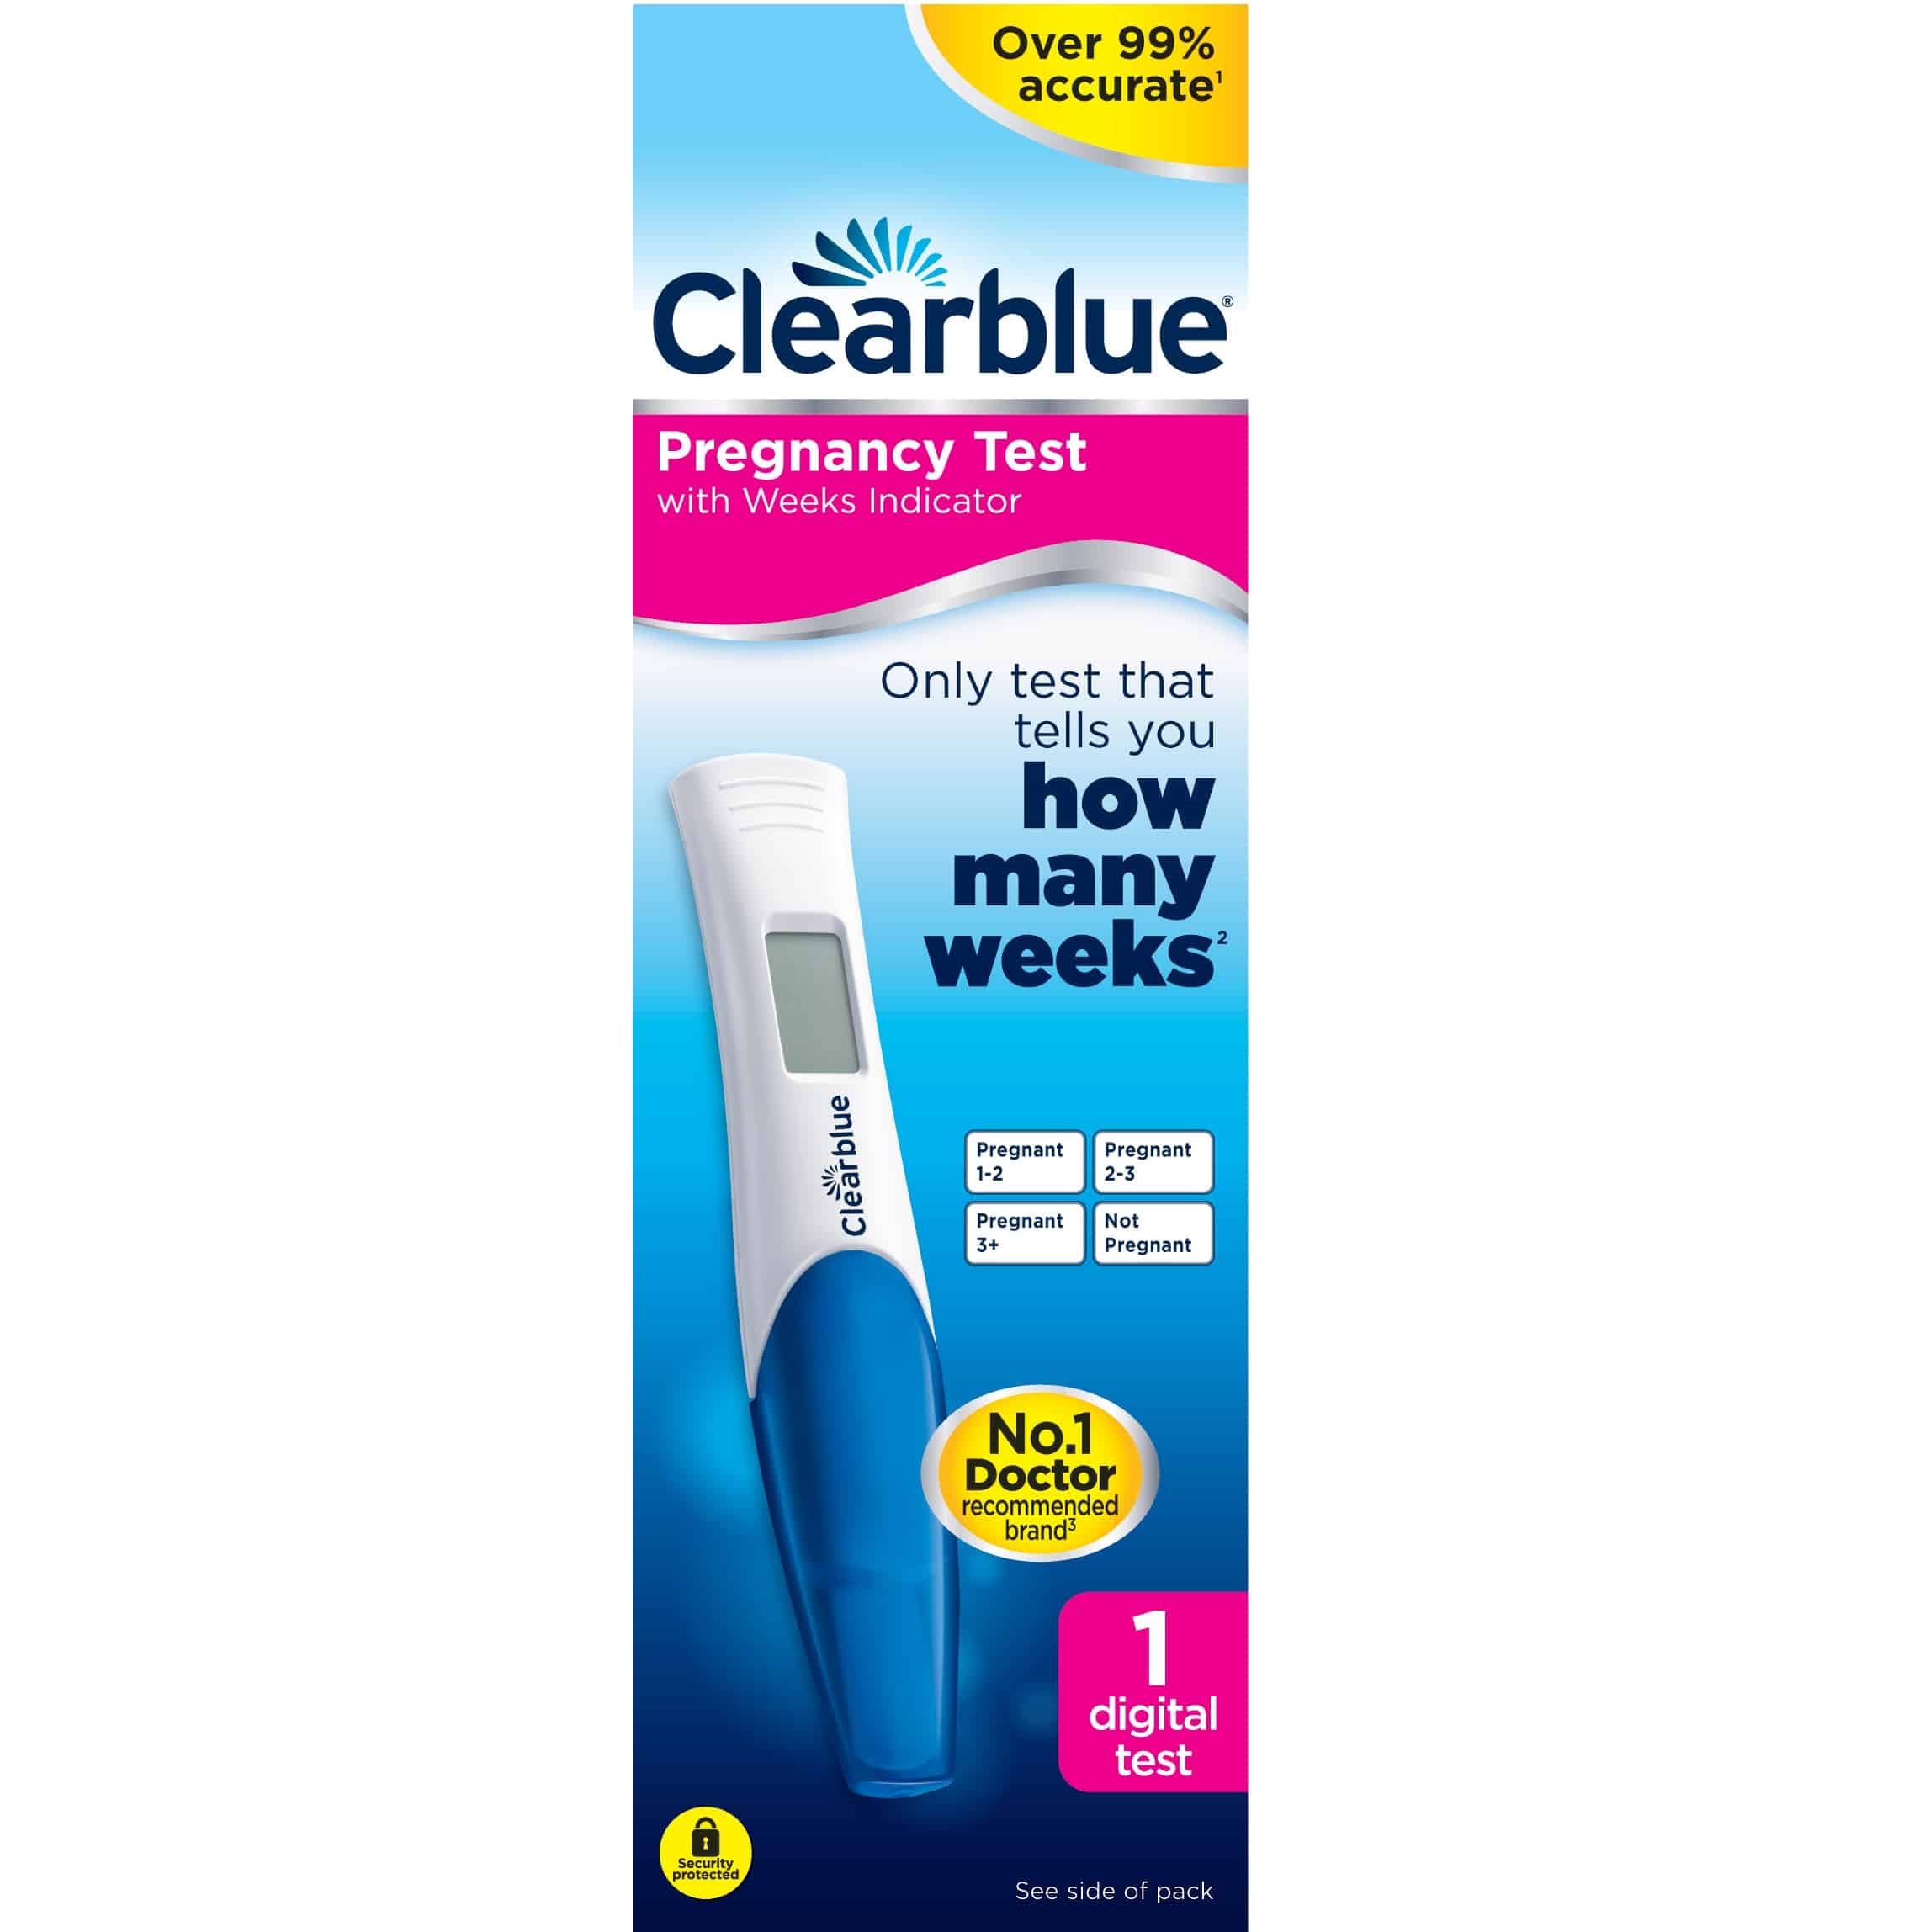 Clearblue Pregnancy Test Digital Weeks Indicator Over 99% Accurate